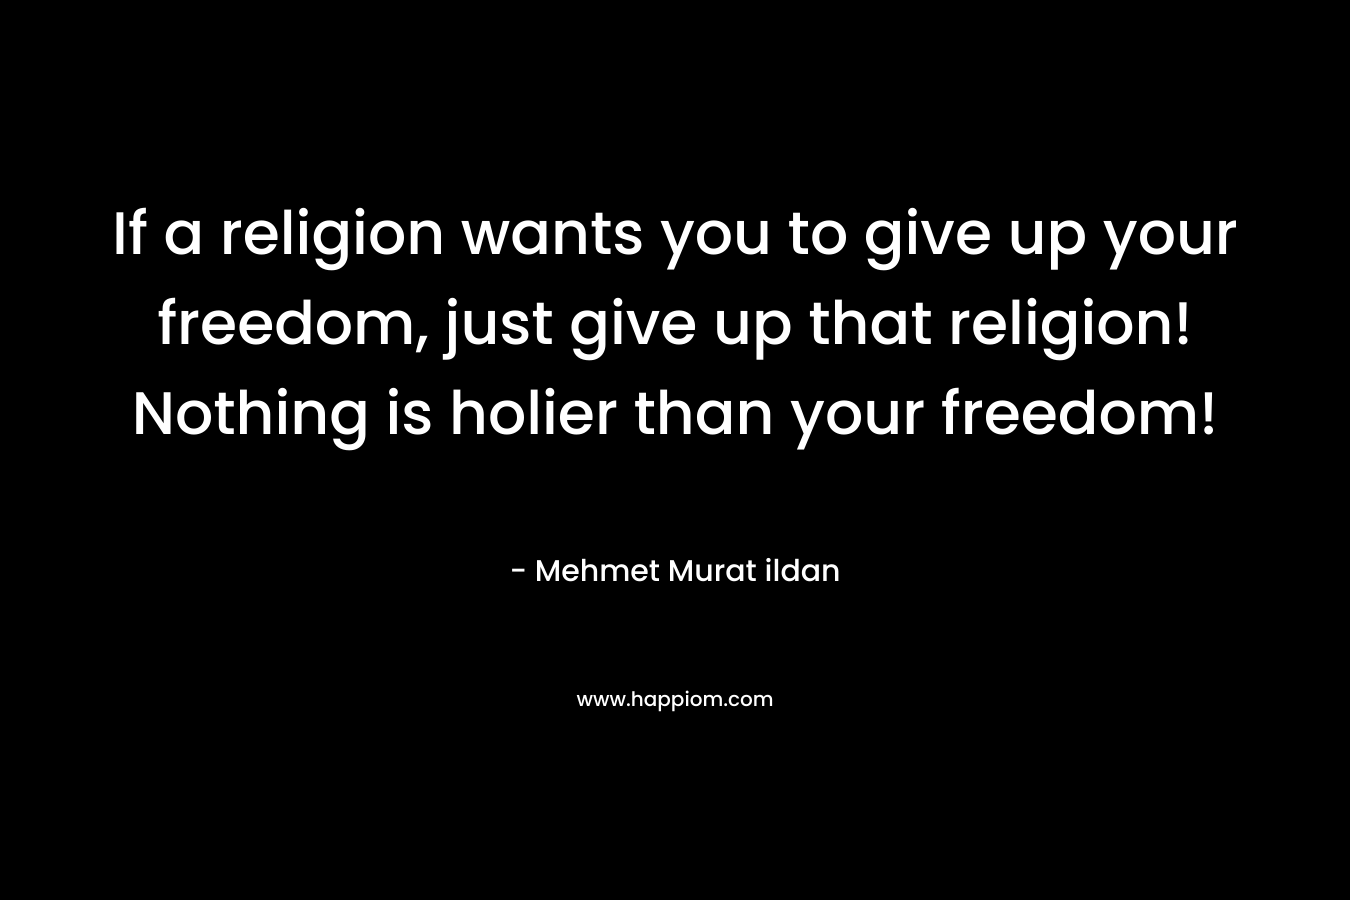 If a religion wants you to give up your freedom, just give up that religion! Nothing is holier than your freedom!